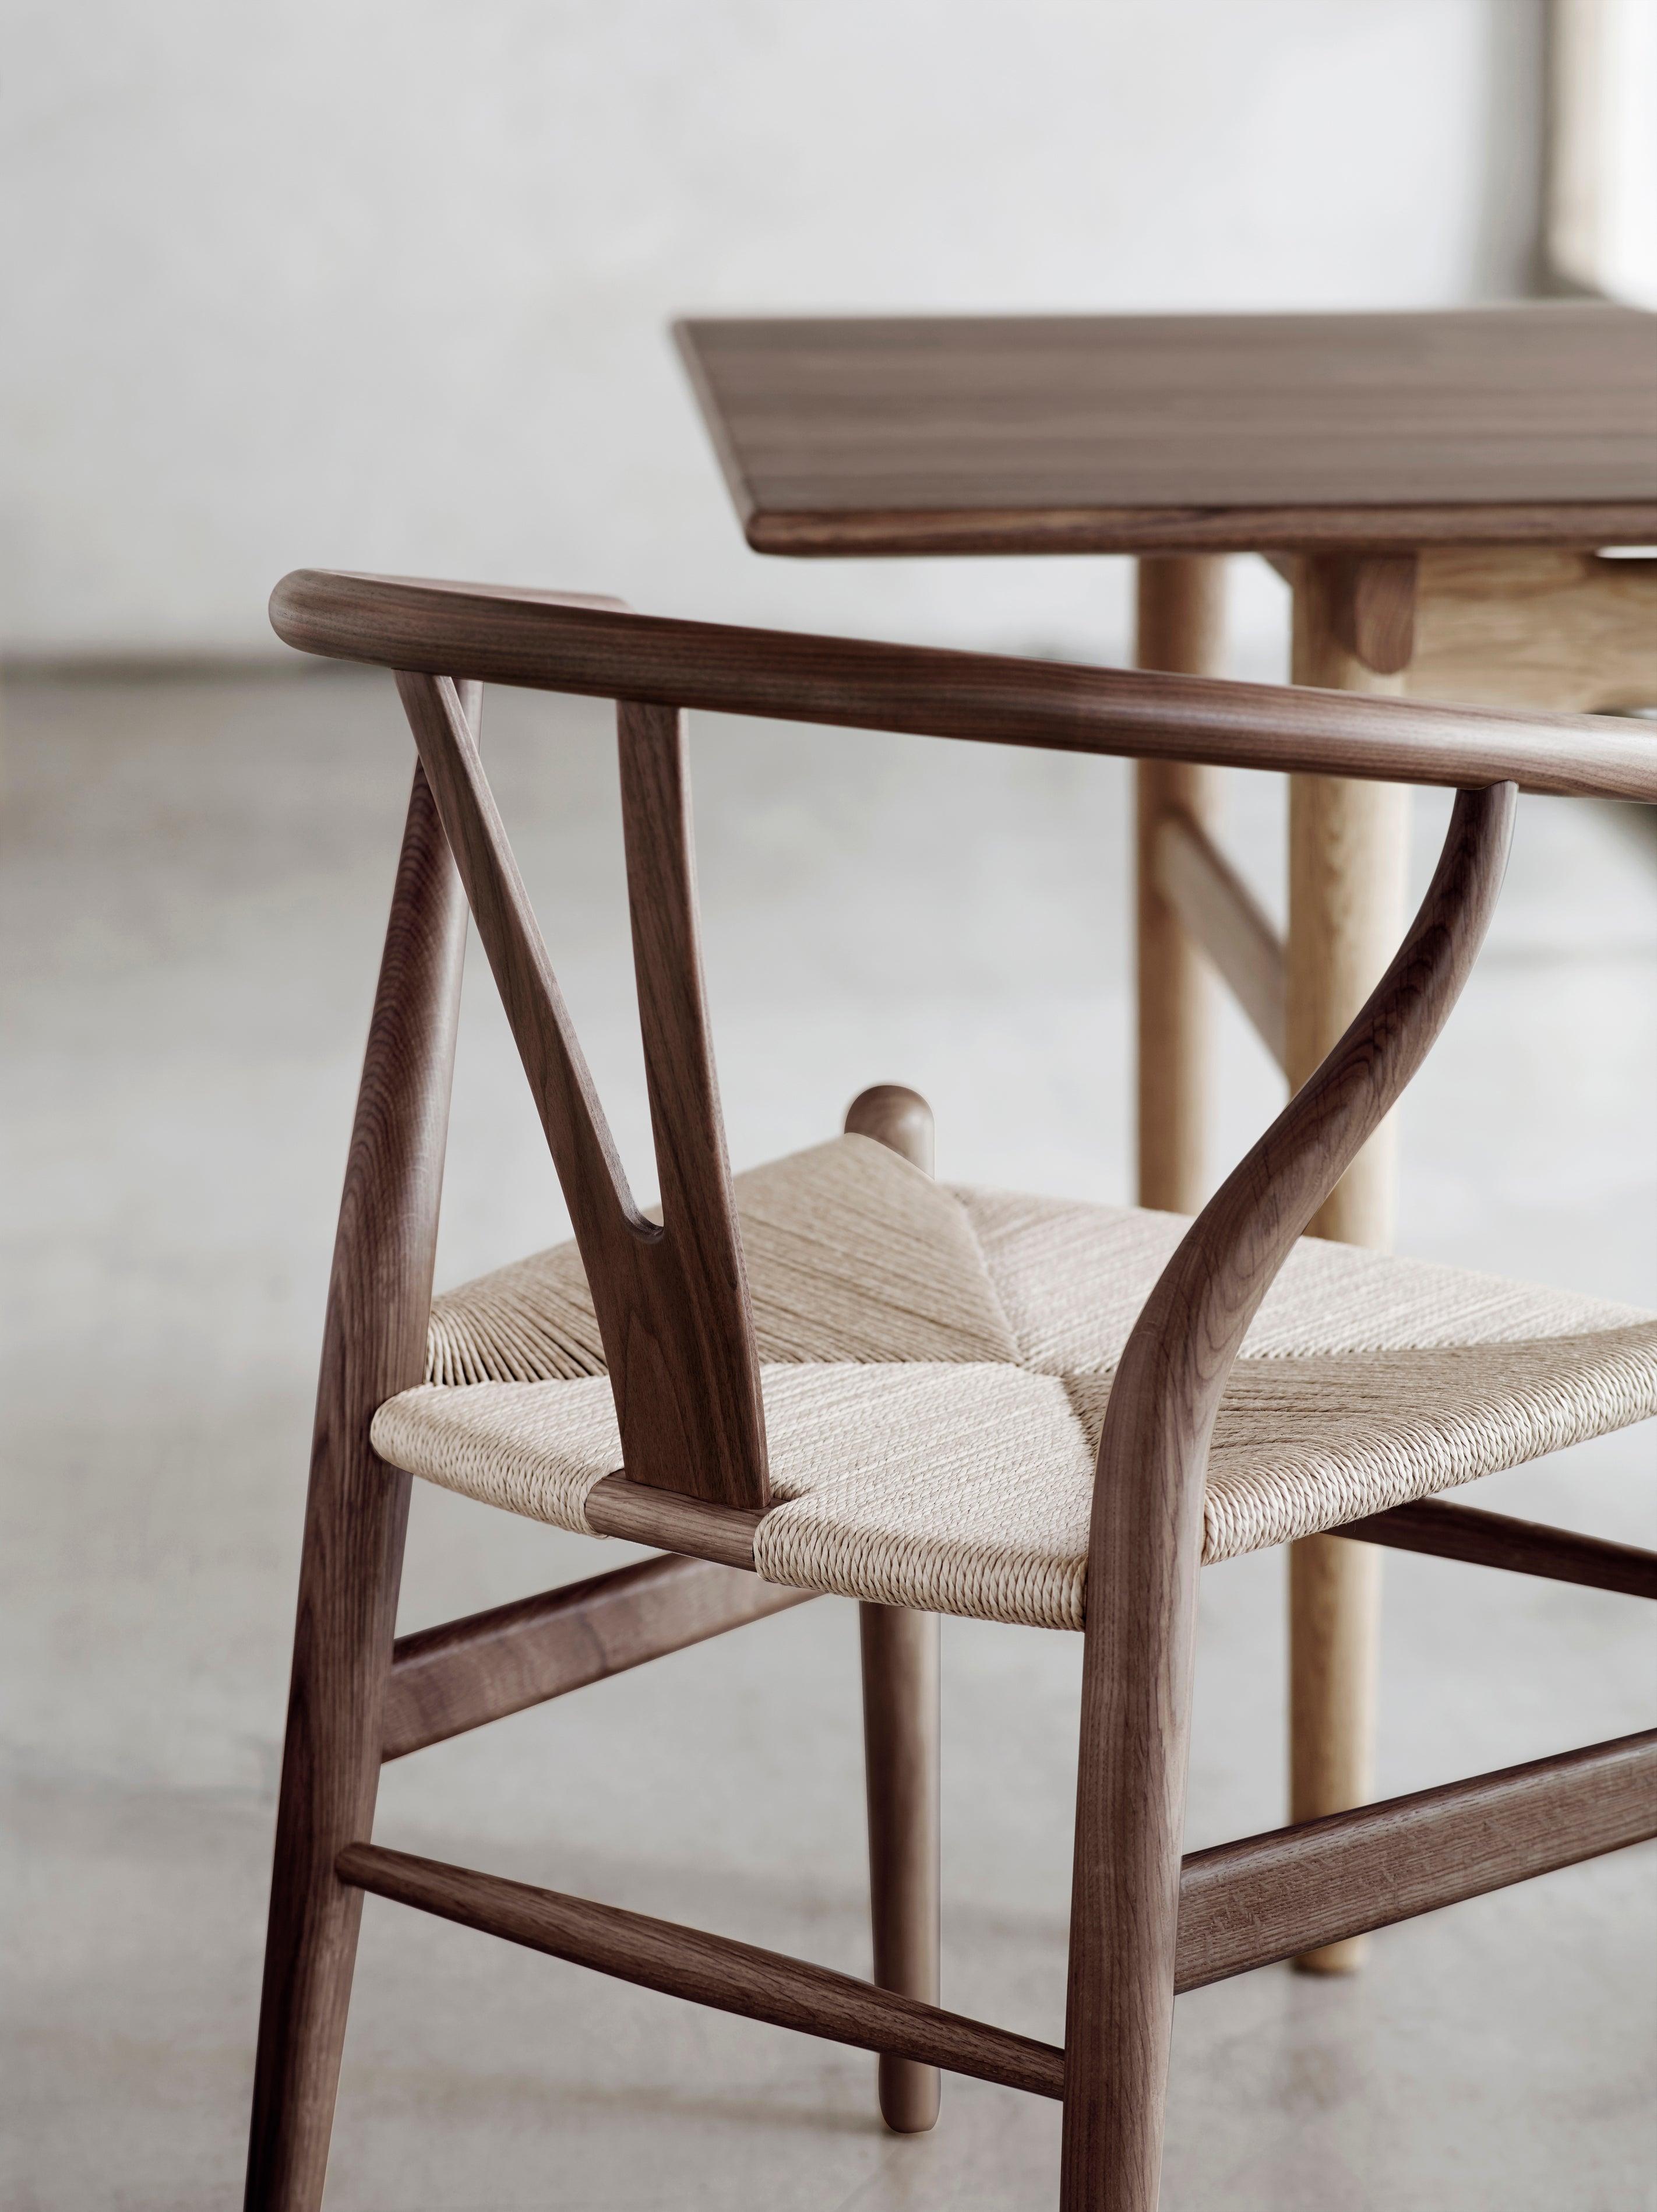 With a form that is uniquely its own, the iconic CH24 Wishbone chair by Hans J. Wegner holds a special place in the world of modern design. When designing the CH24, Wegner chose to combine the back- and armrest into a single piece. To give stability